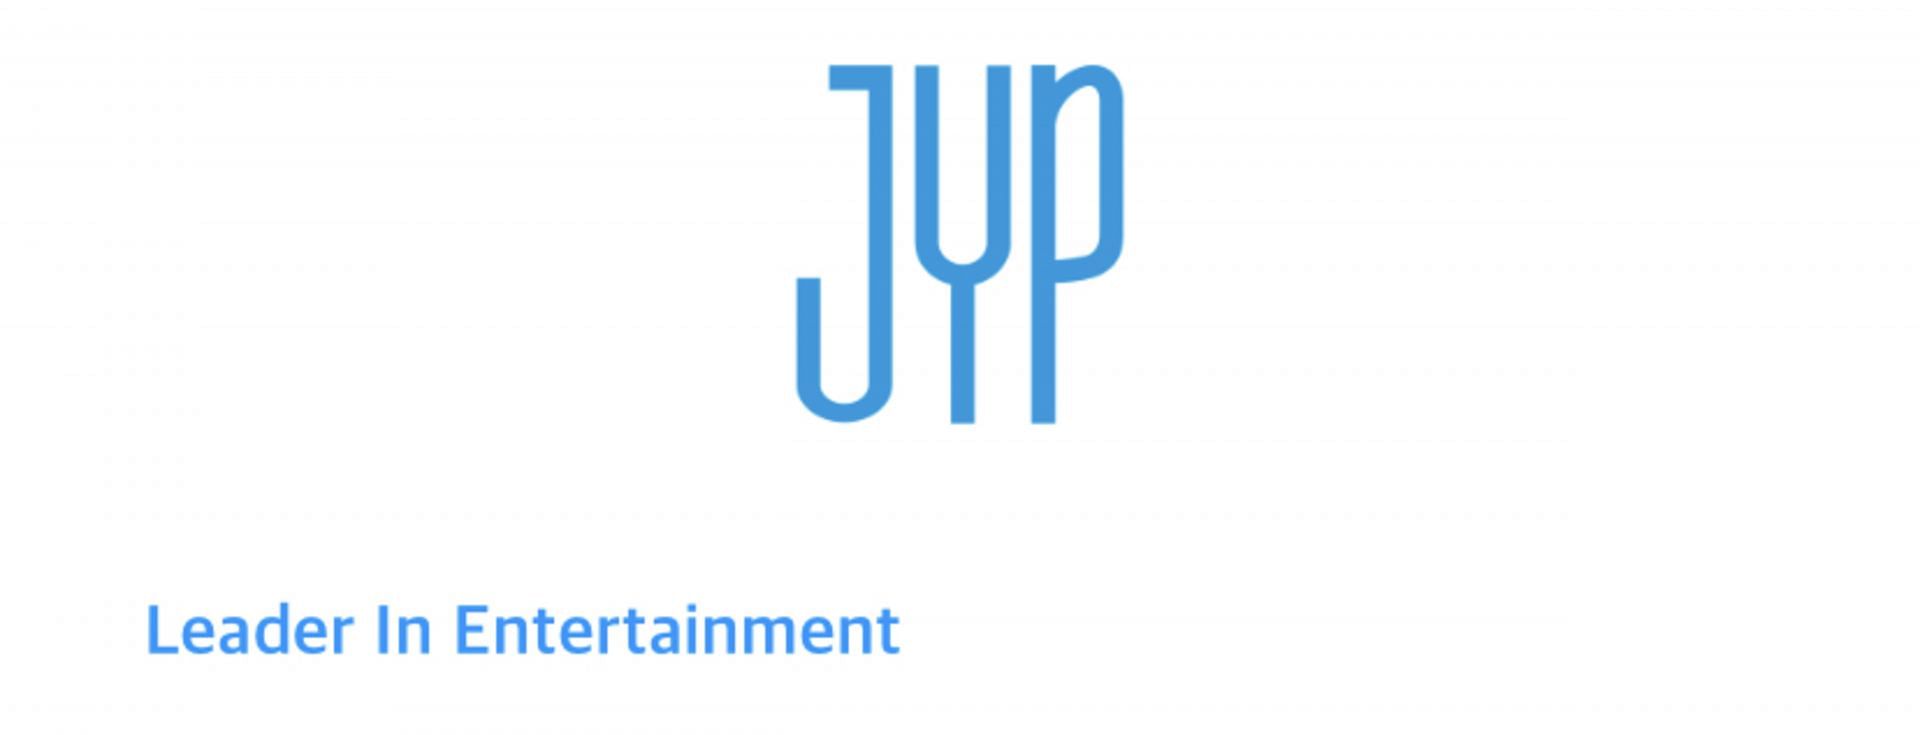 The South Korean label has made inroads in the US market (Image via JYP Entertainment official website)